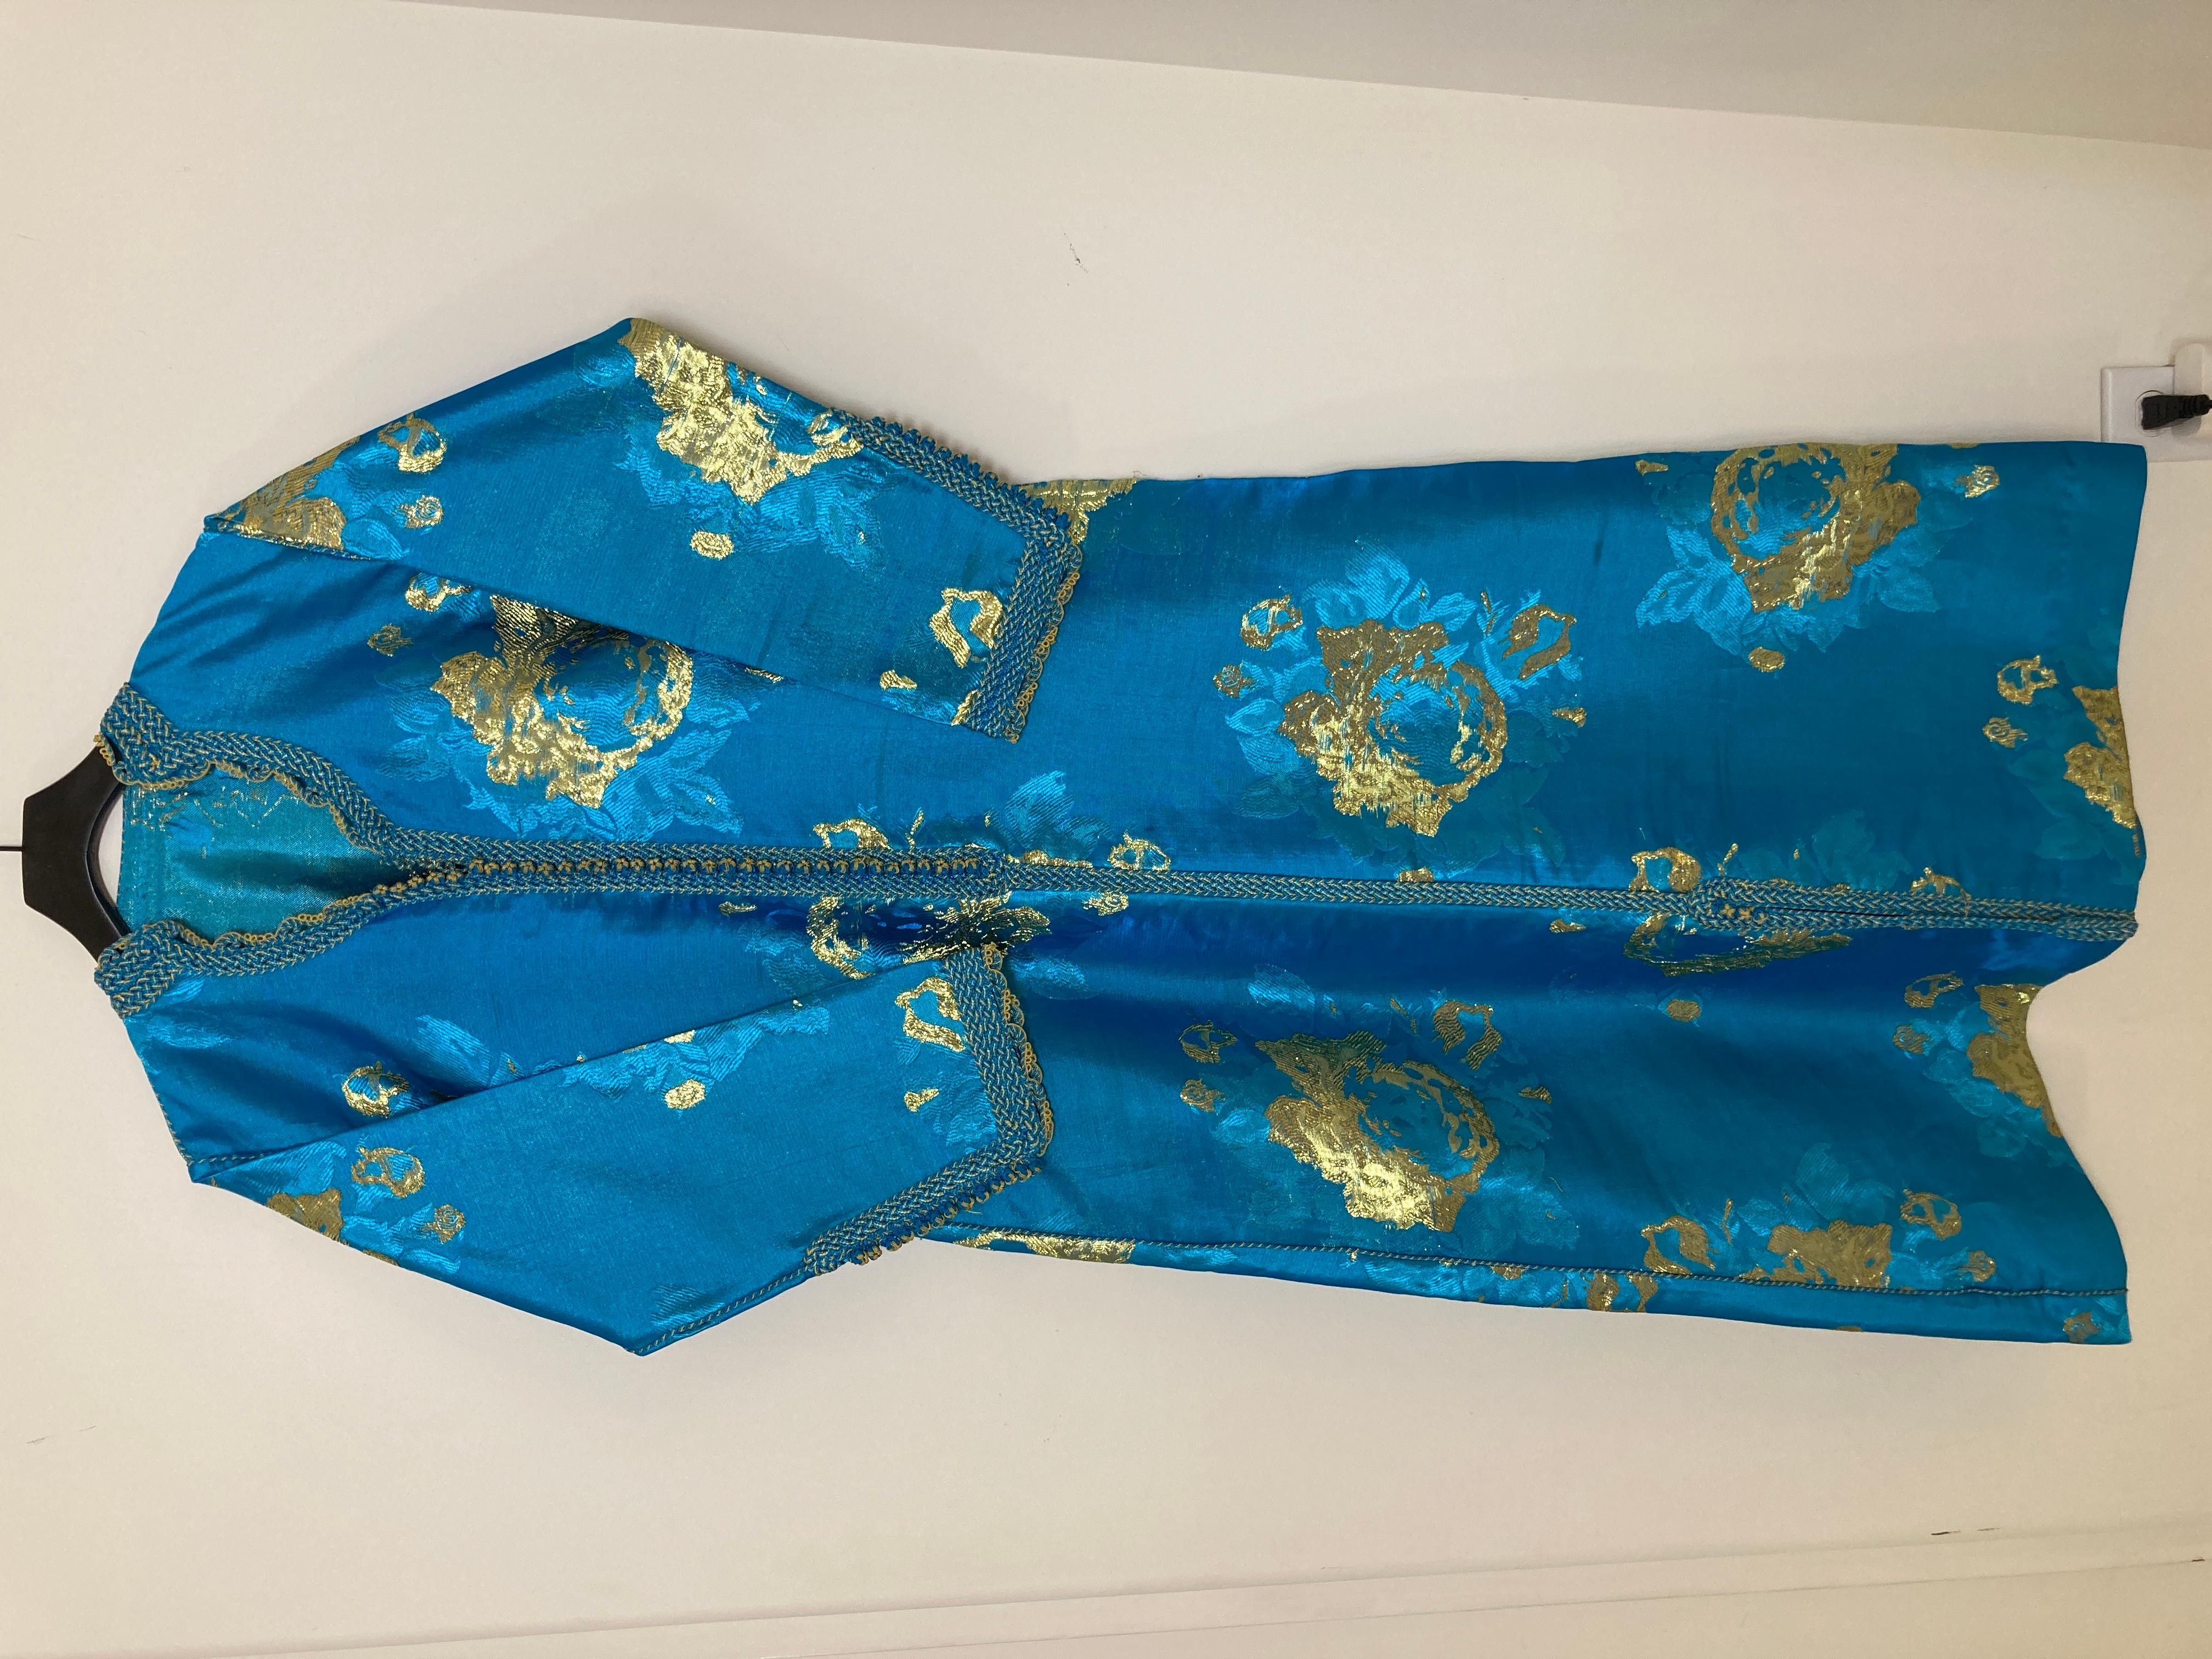 Moroccan Vintage Kaftan in Turquoise and Gold Floral Brocade Metallic Lame 13